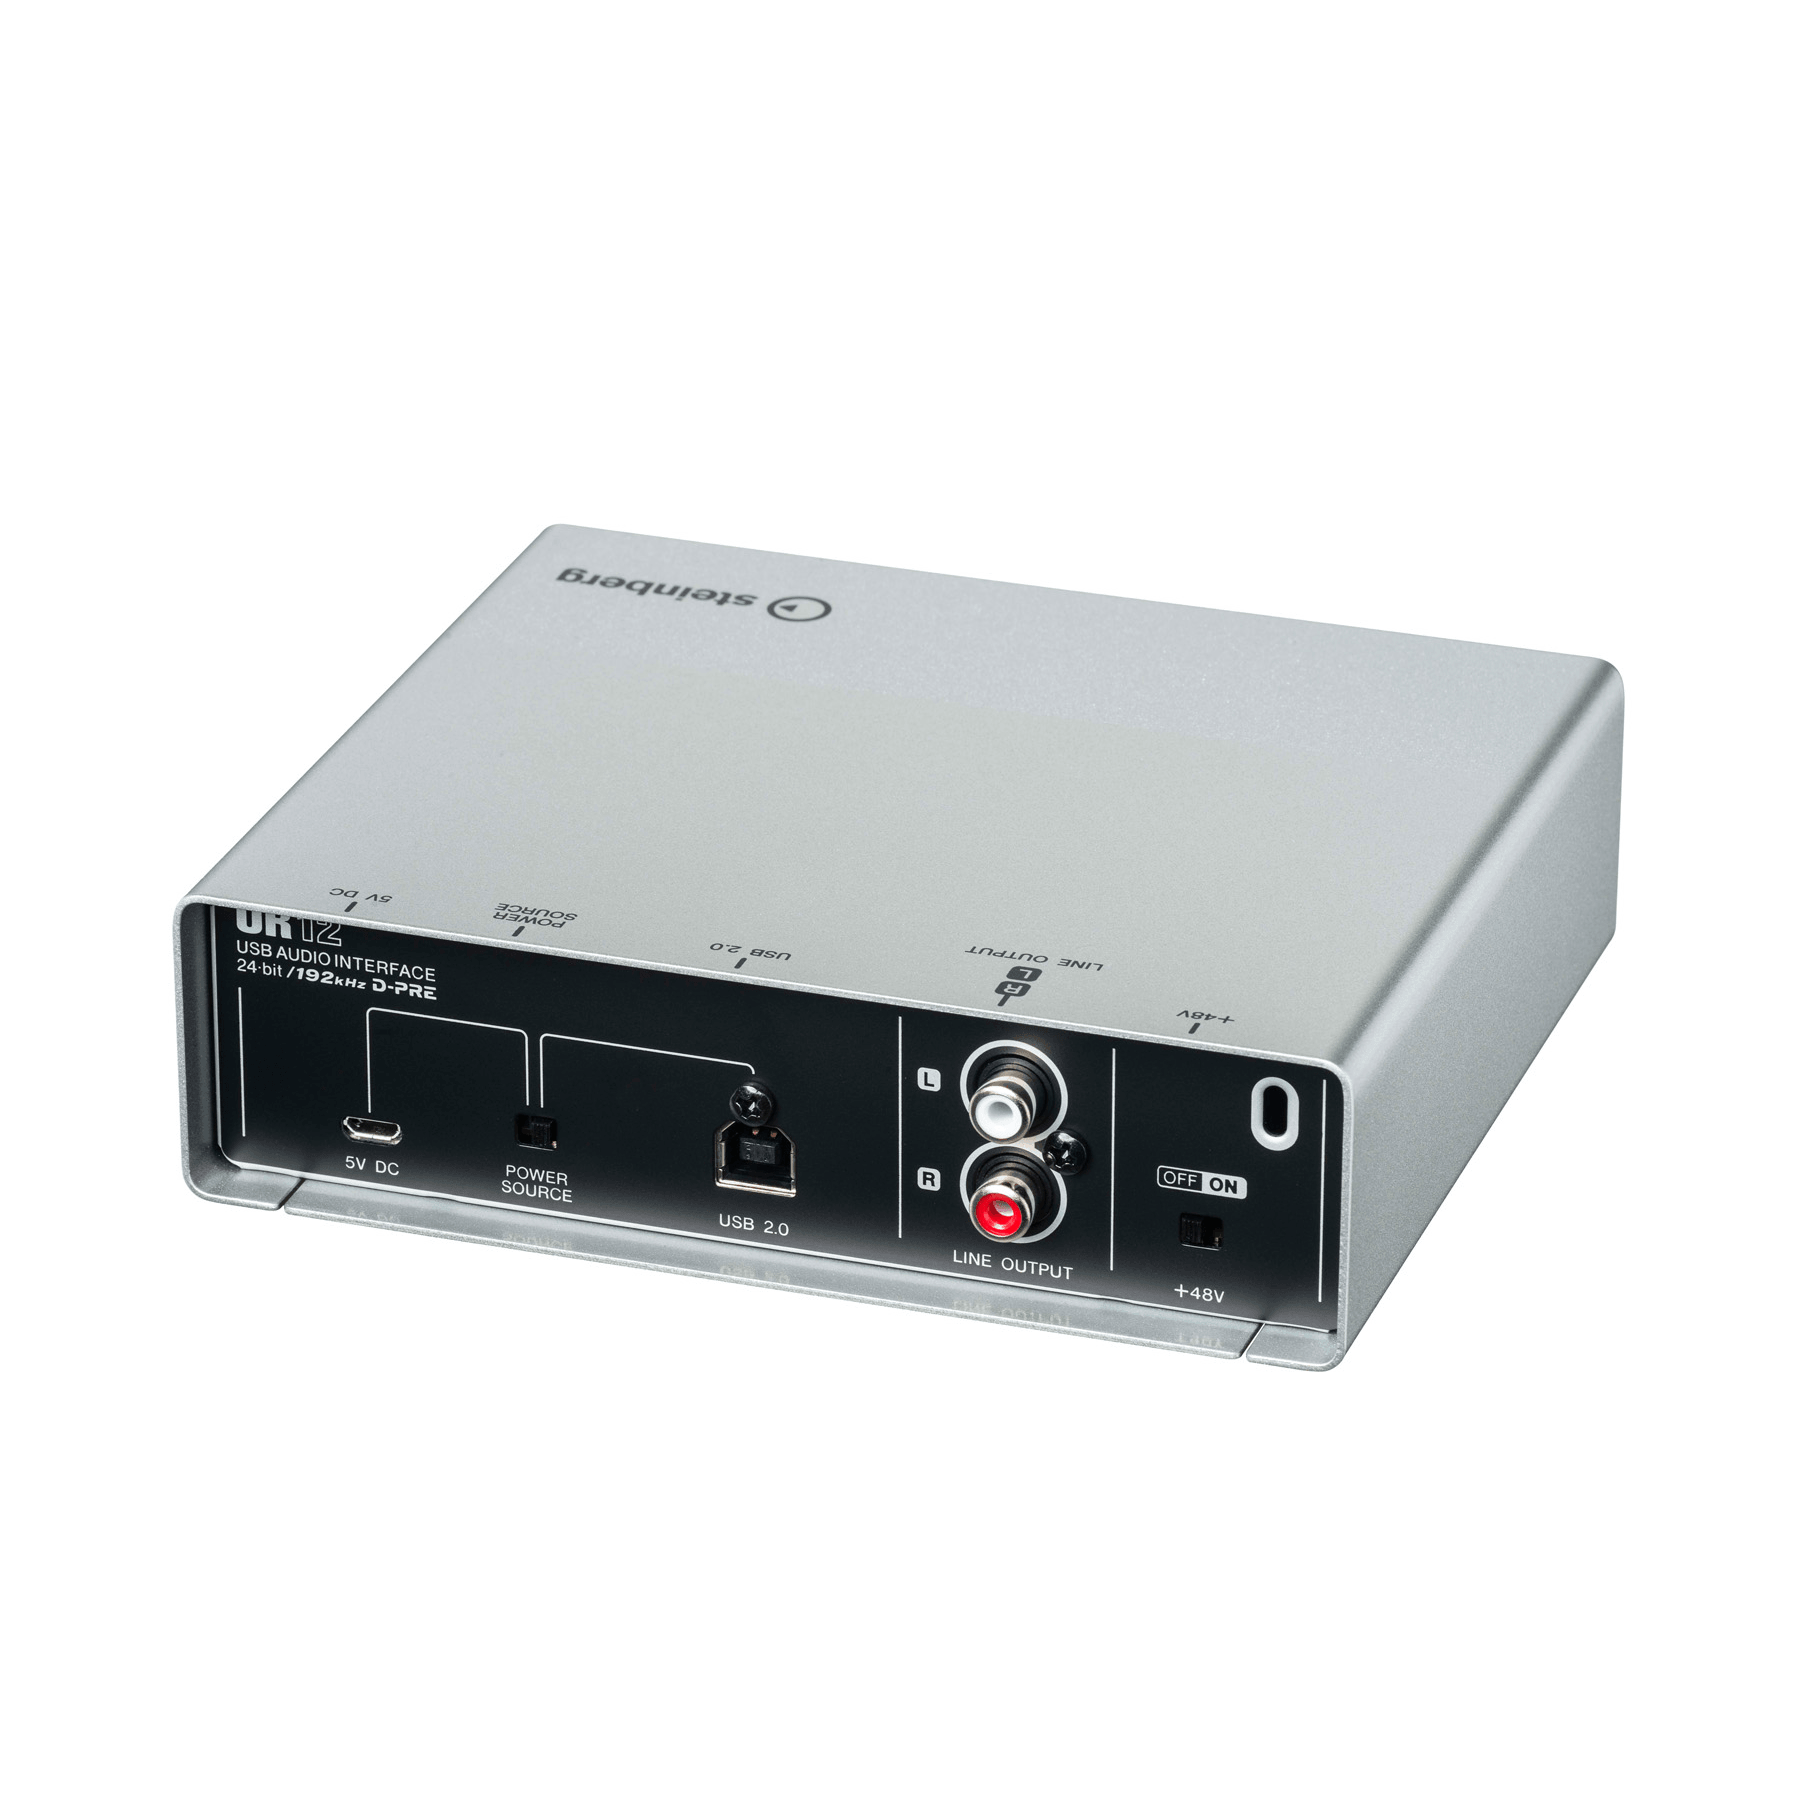 Steinberg UR12 Audio Interface - Live & Recording - Interfaces by Steinberg at Muso's Stuff